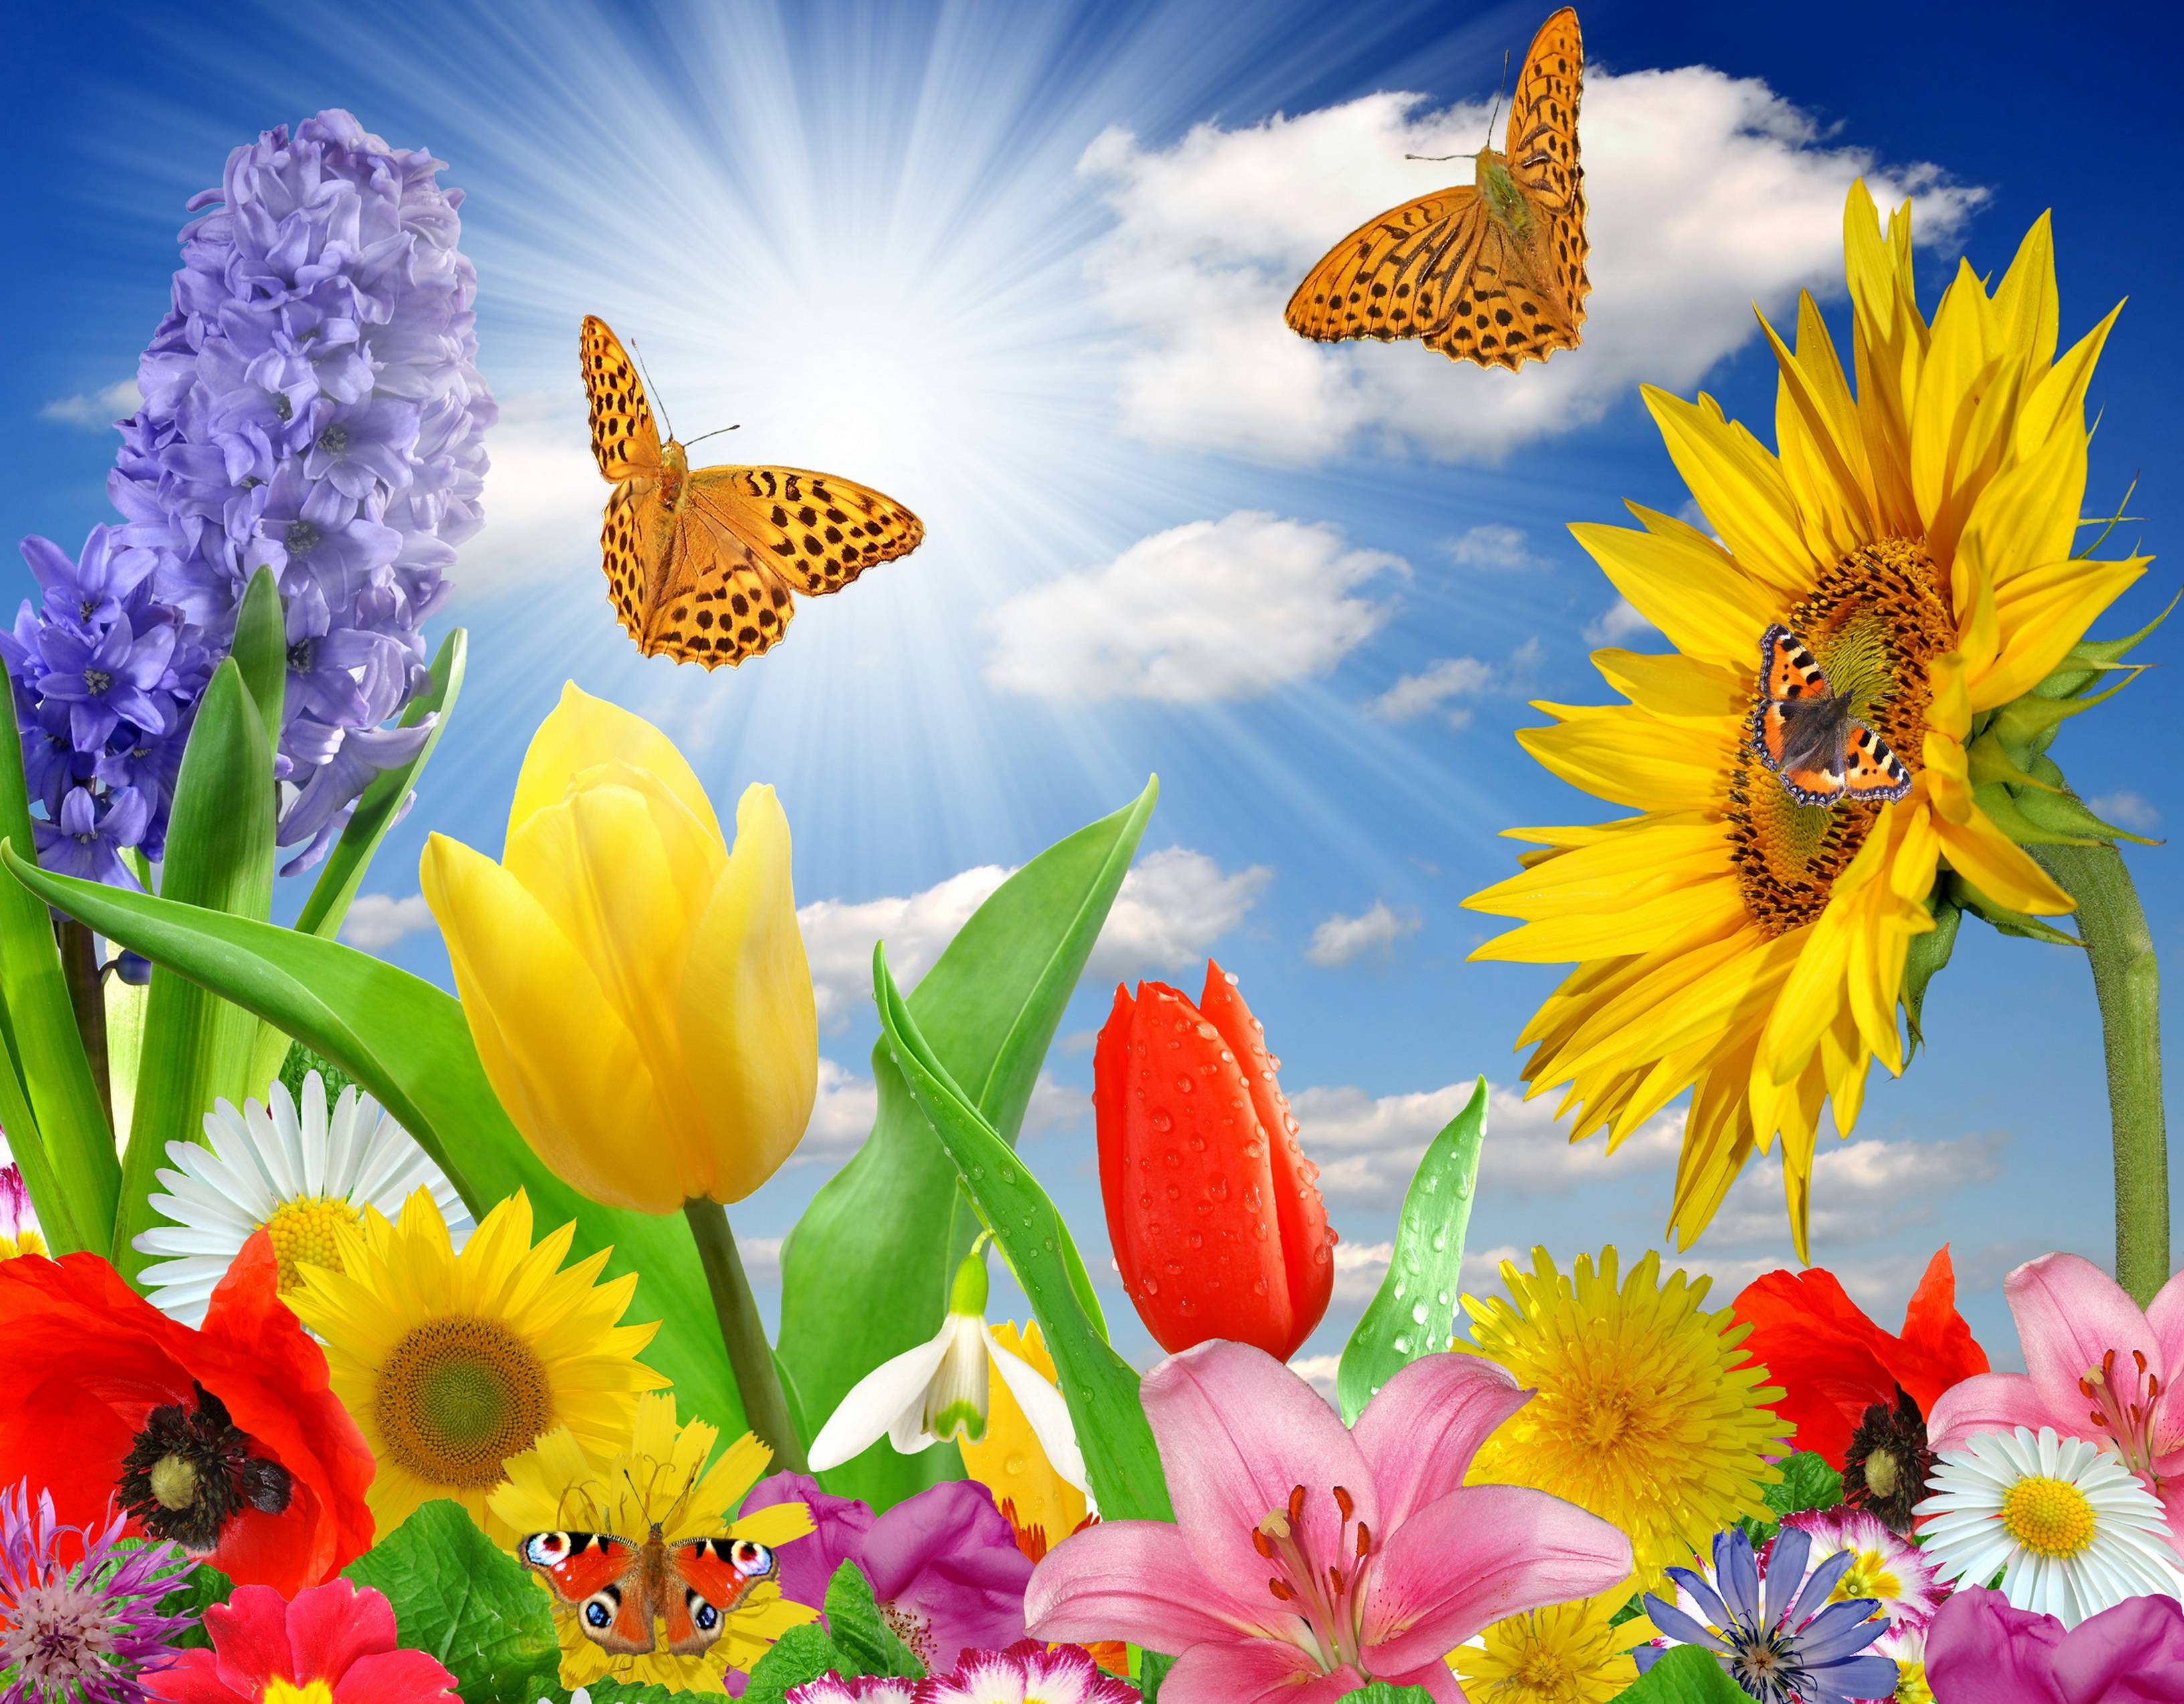 Flowers and Butterflies Wallpapers on WallpaperDog